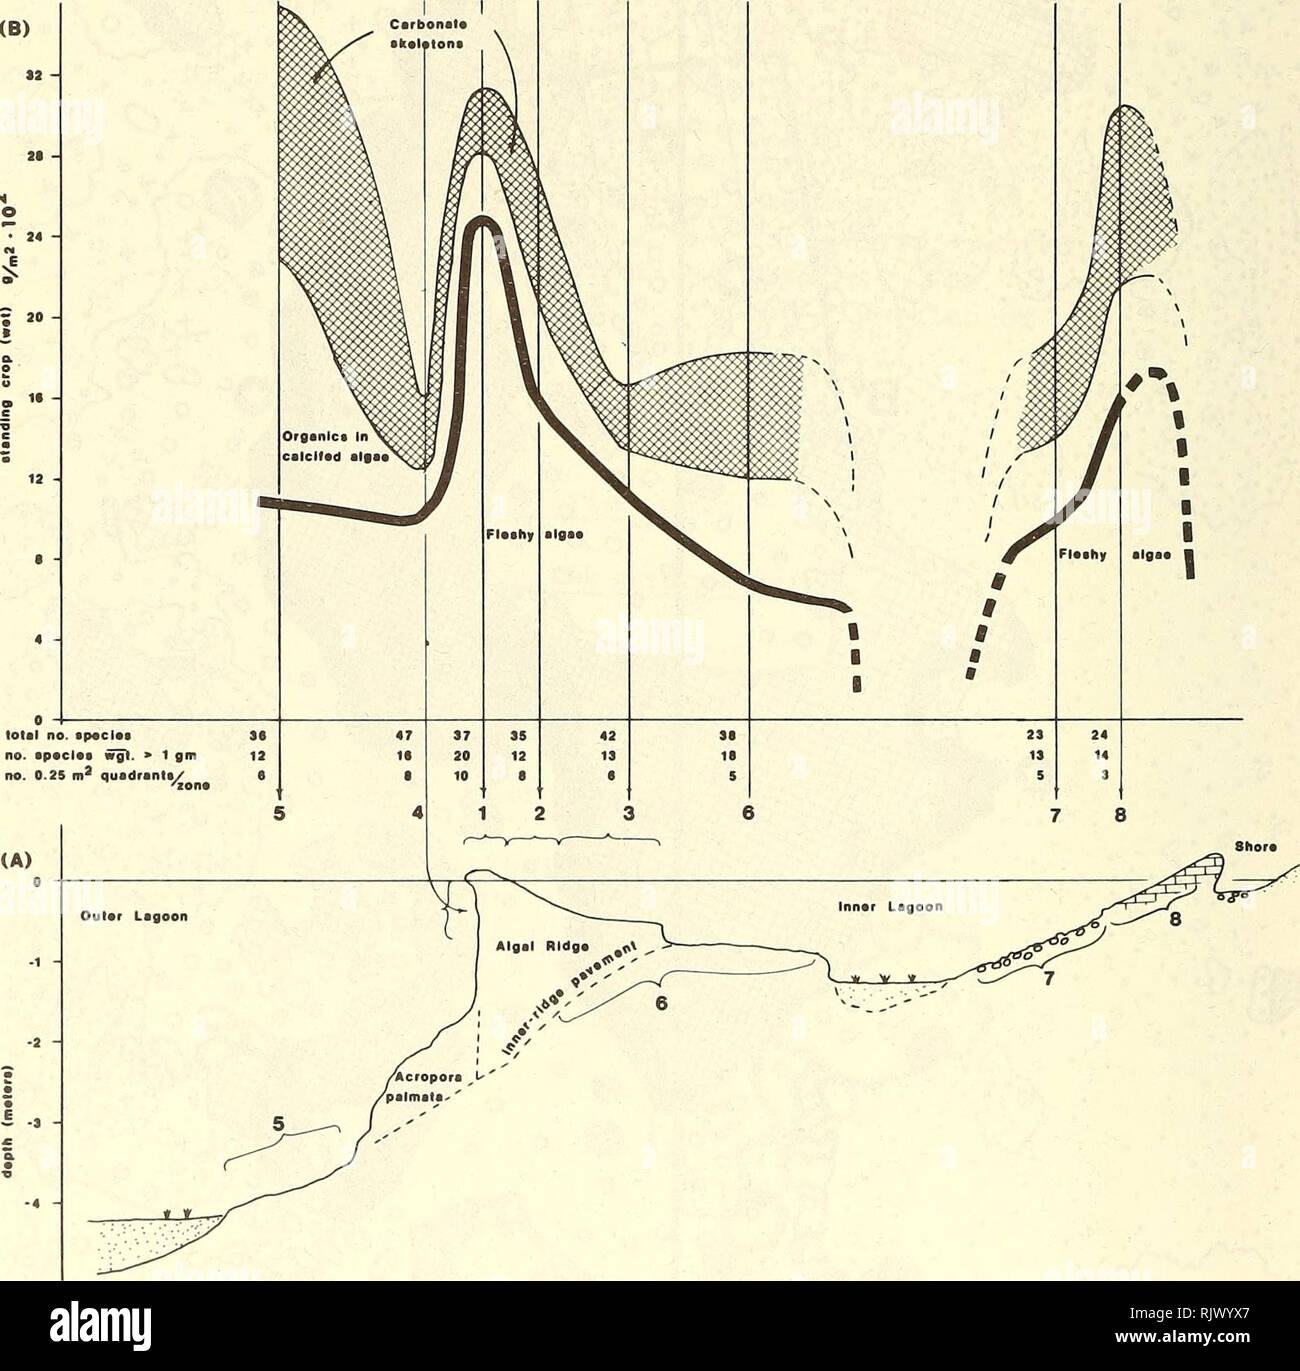 . Atoll research bulletin. Coral reefs and islands; Marine biology; Marine sciences. Fig. 6B. Mean wet standing crop as a function of zone. Algae with carbonate skeletons (Jania, Halimeda, Amphiroa and Penicillis) are shown separately in terms of organic biomass and skeletal carbonate. Species number and the number of quadrats taken per zone are indicated.. •0 msttrt Fig. 6A. Generalized bathymetric transect from the shore across the Boiler Bay algal ridge to the outer lagoon, showing the depths and positions of the algal zones.. Please note that these images are extracted from scanned page im Stock Photo